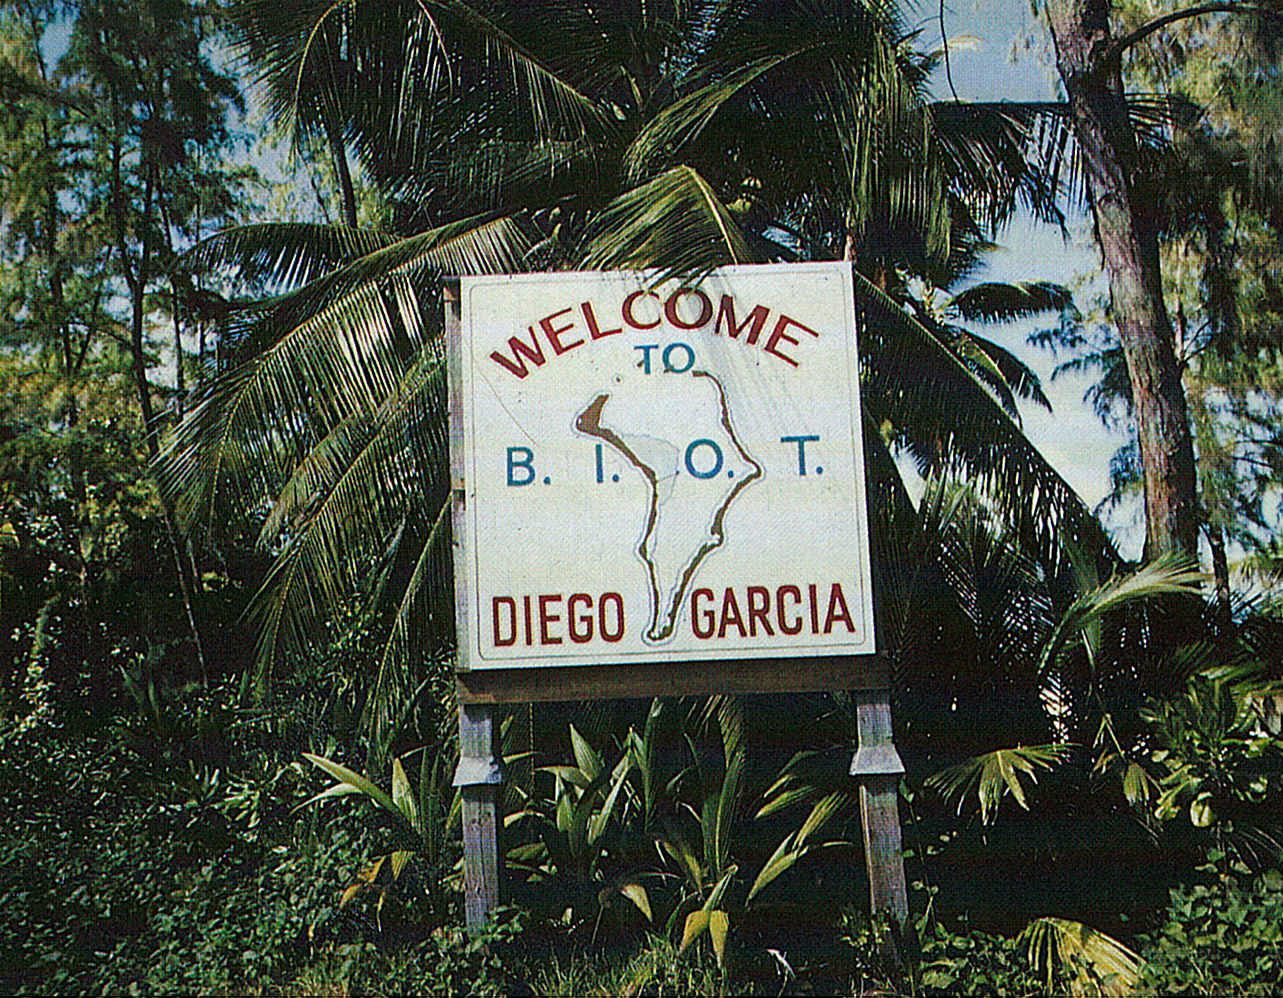 Sign surrounded by jungle foliage: Welcome to Diego Garcia, B.I.O.T